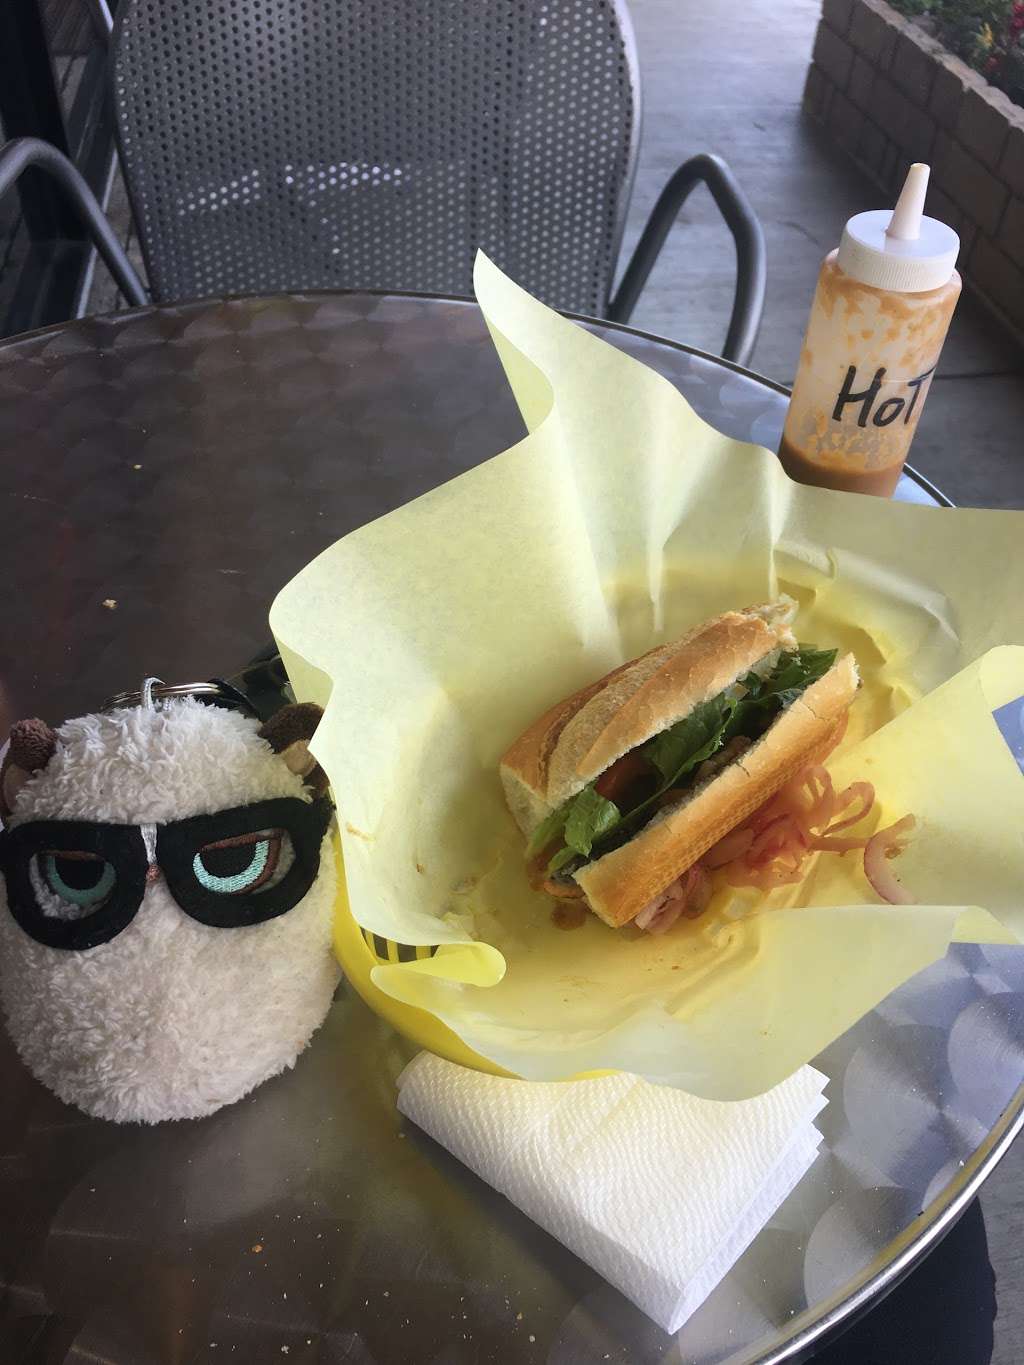 Tasty Sandwiches | 9374 Westminster Blvd, Westminster, CA 92683 | Phone: (714) 576-7686